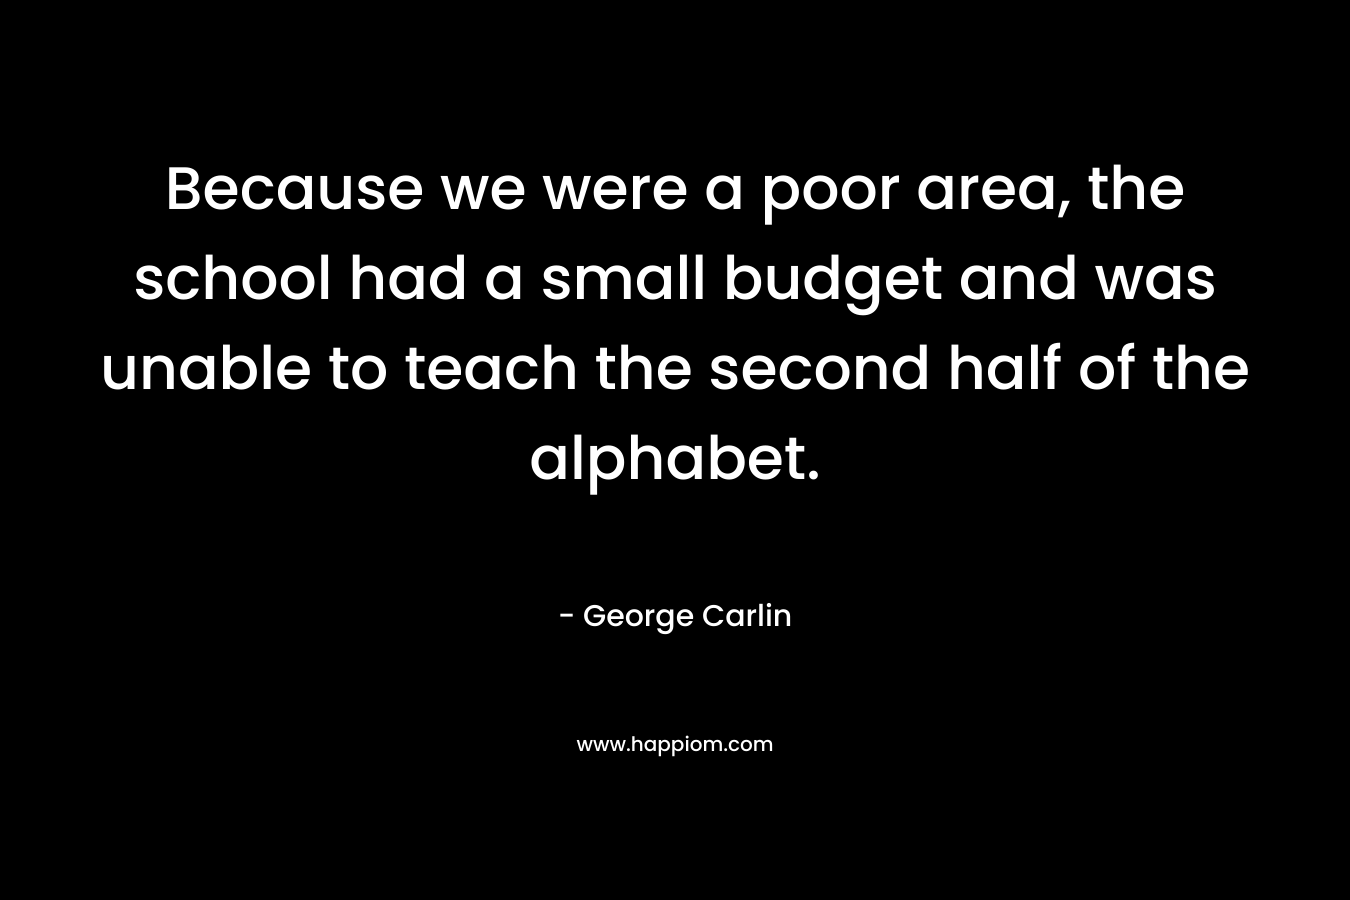 Because we were a poor area, the school had a small budget and was unable to teach the second half of the alphabet. – George Carlin